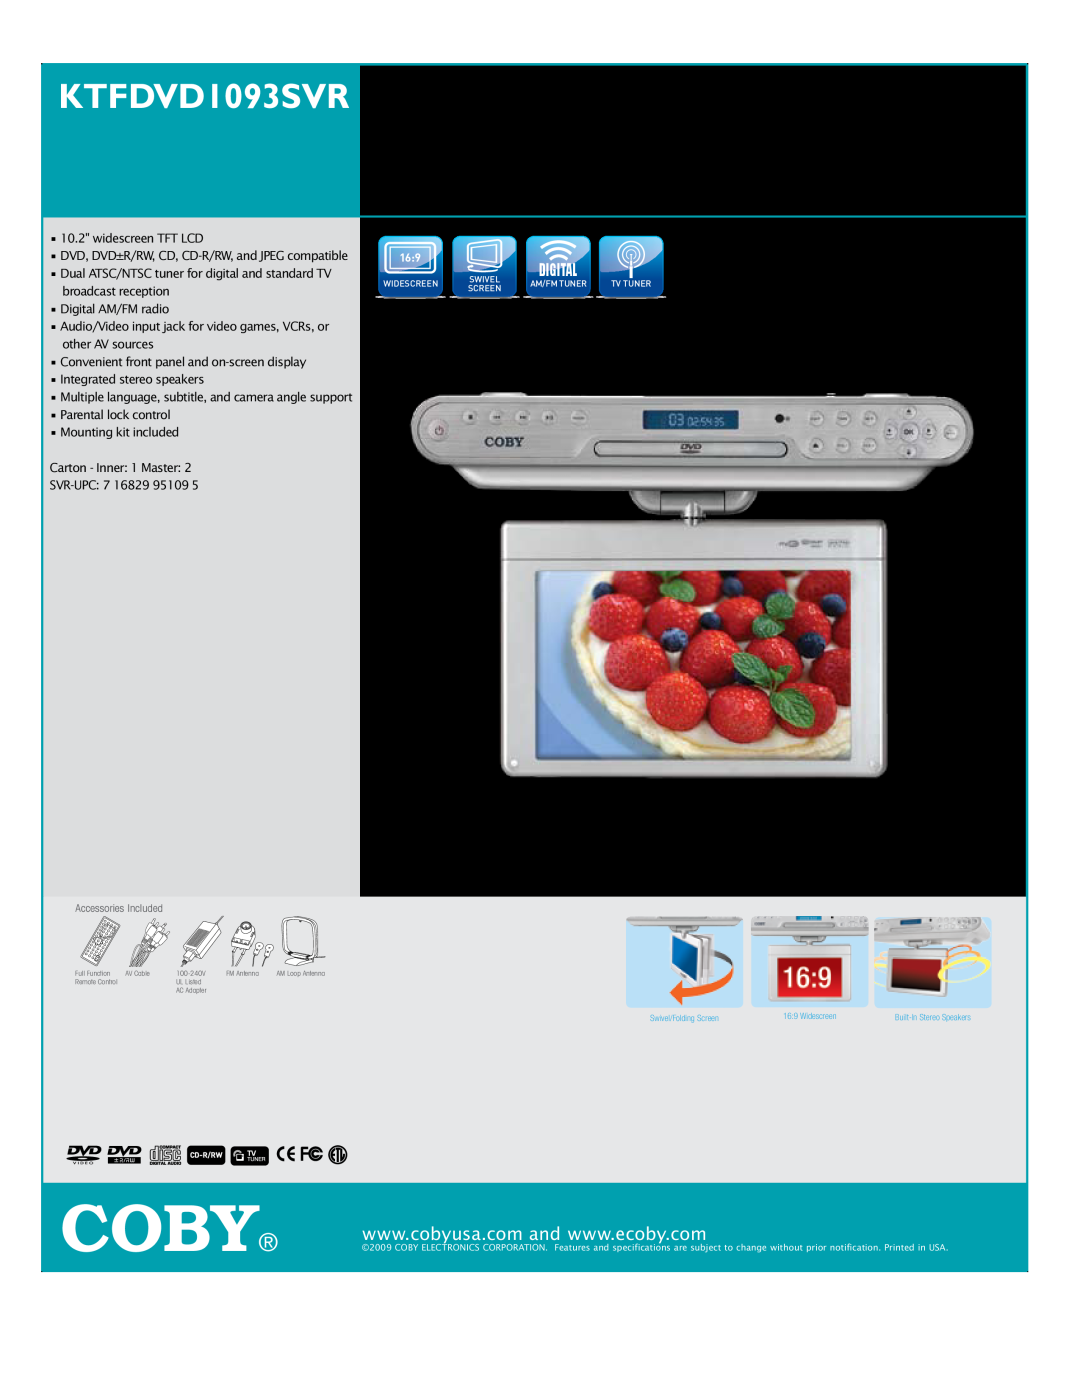 COBY electronic KTFDVD1093SVR specifications Coby 